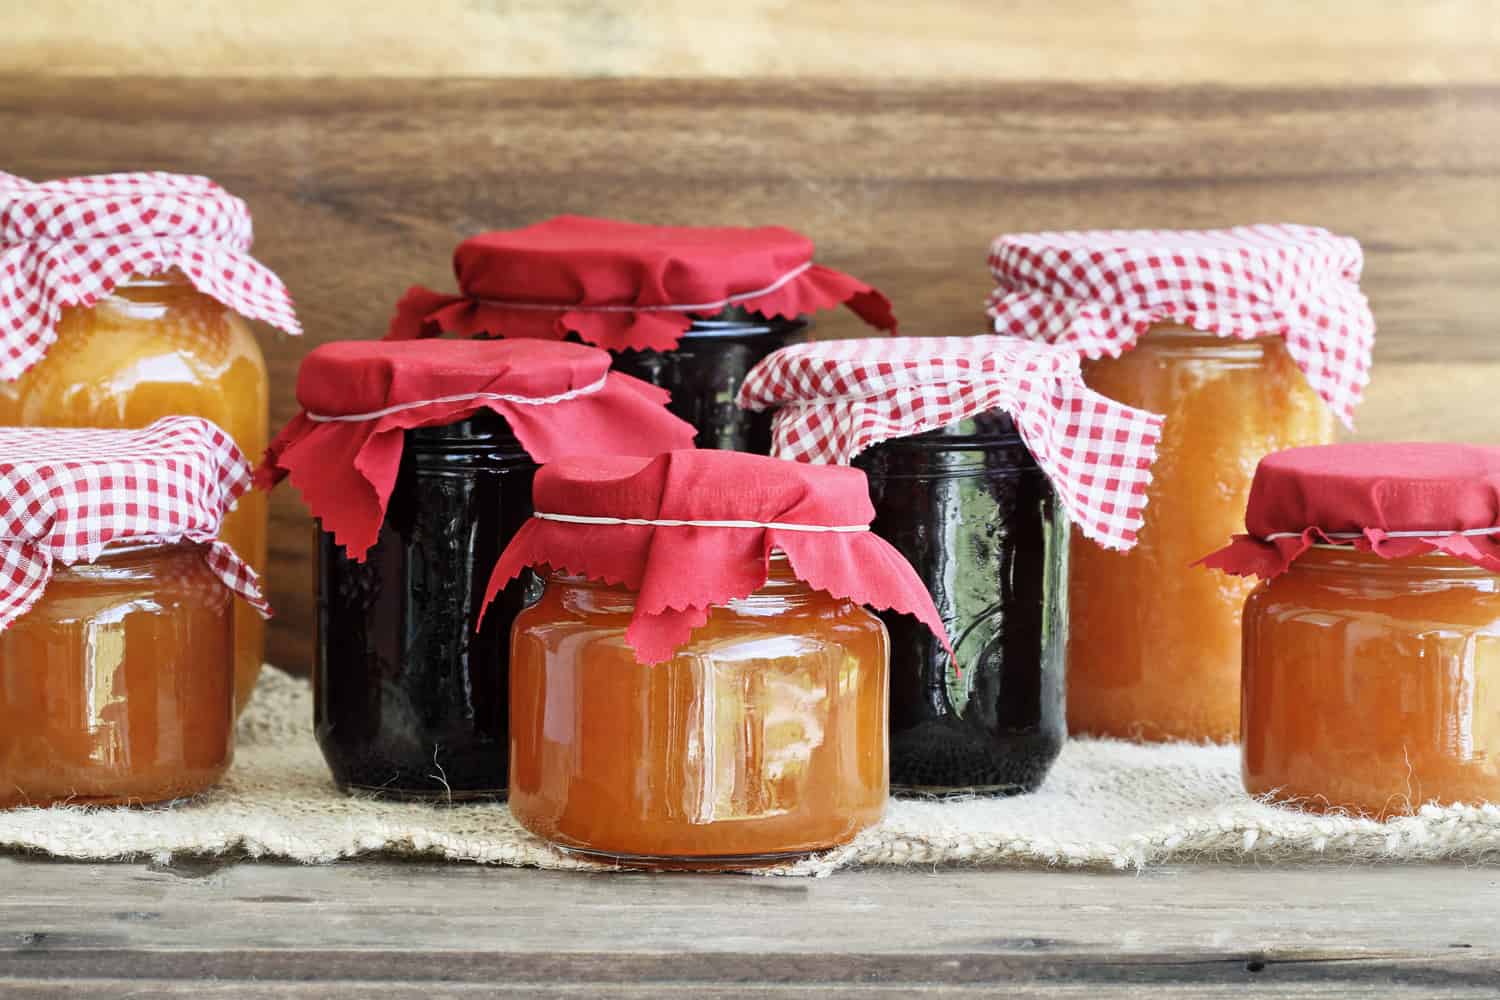 Variety of homemade jams and preserves covered with checkered and red cloth against a rustic background.